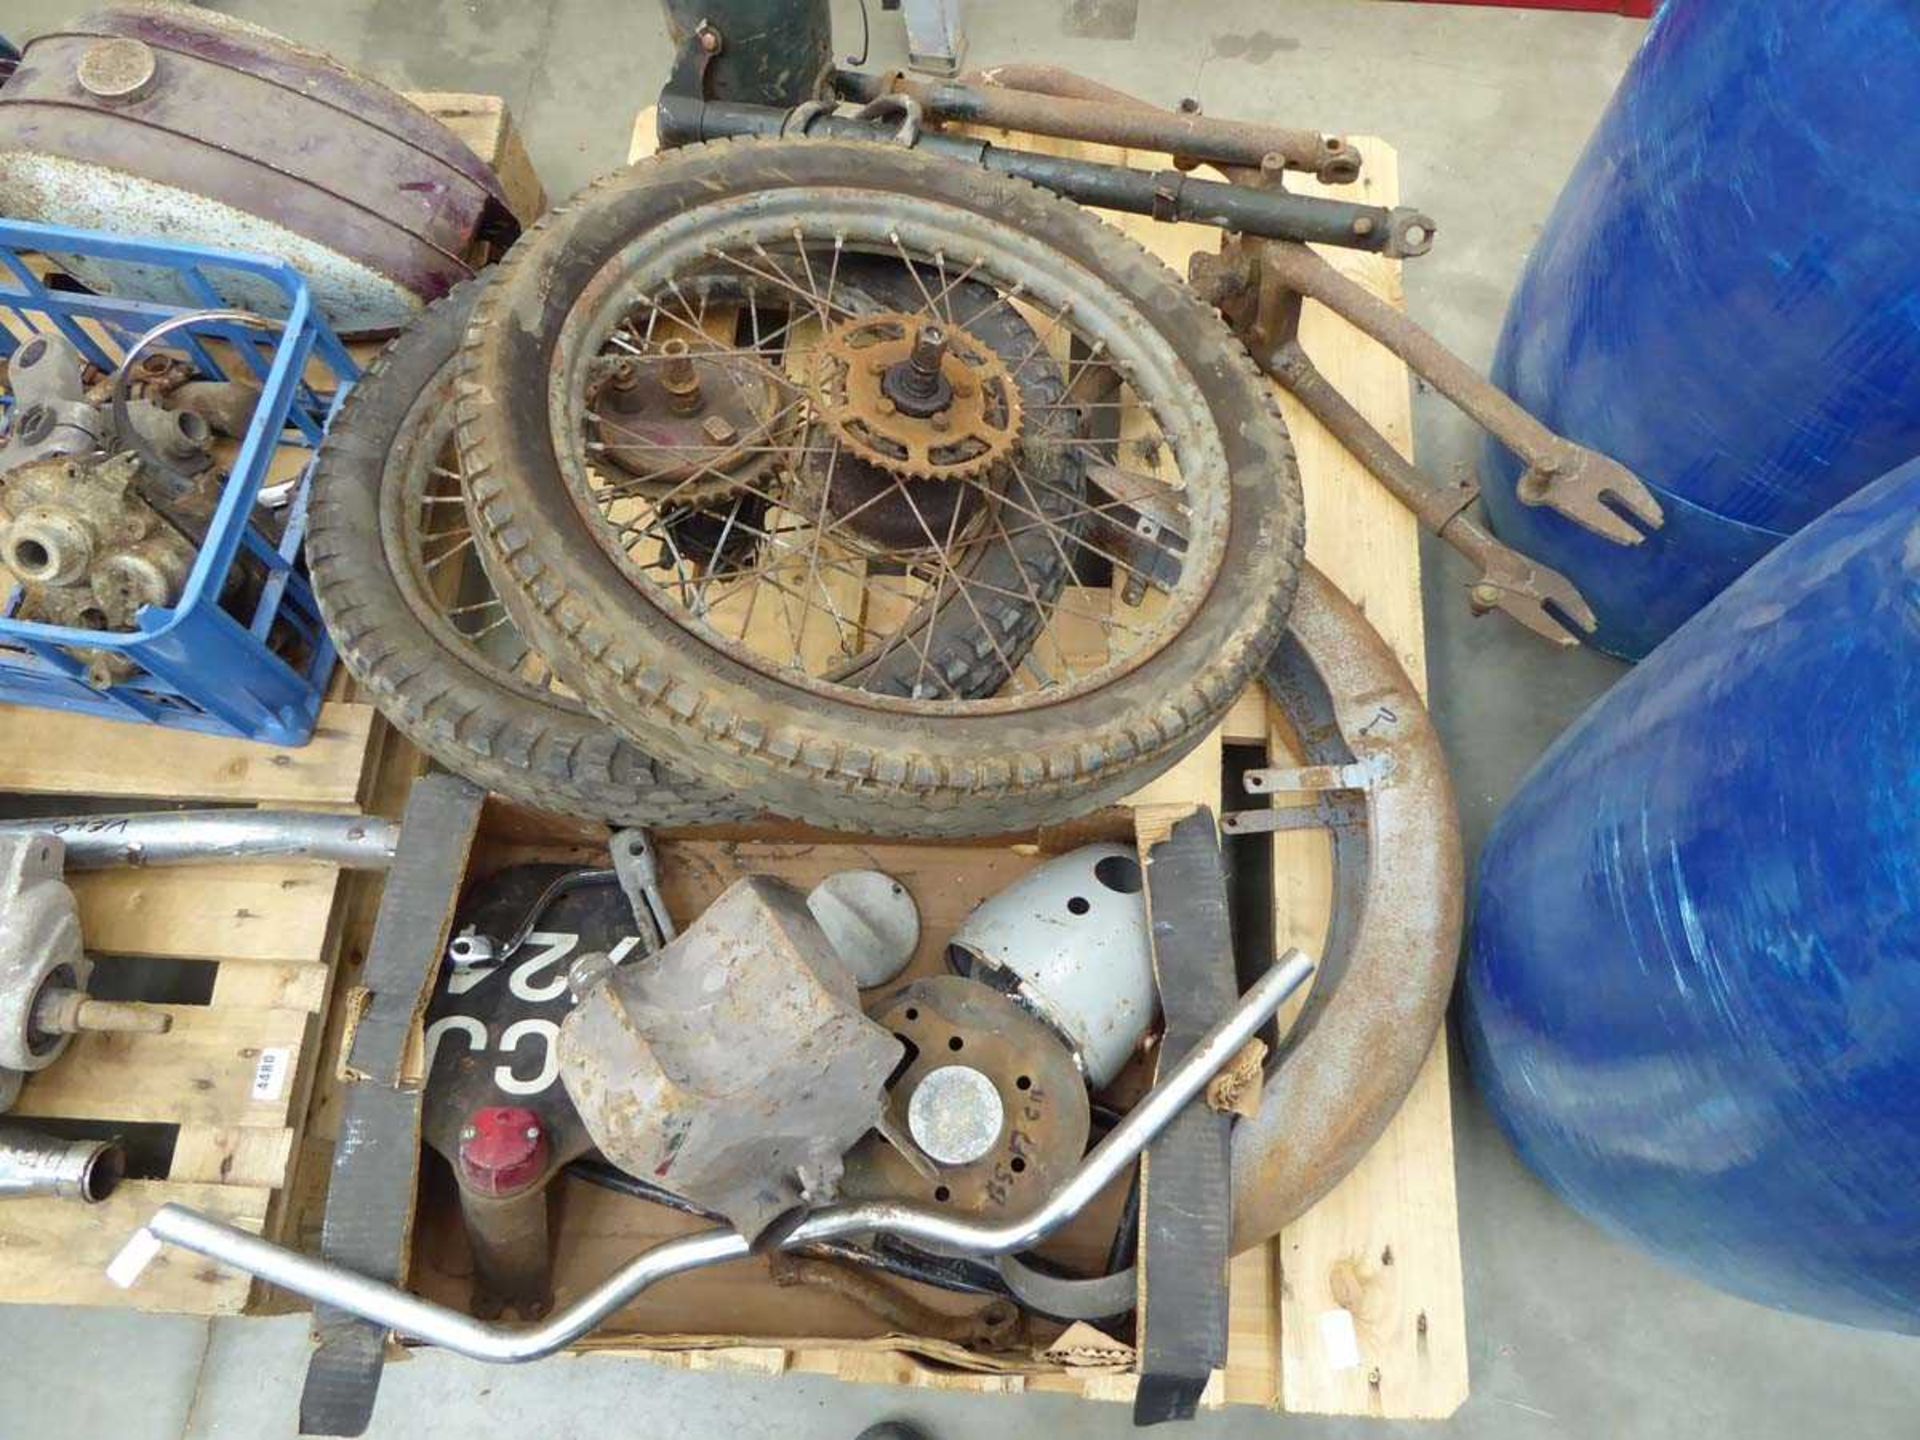 2 pallets of vintage motorcycle spares including wheels, tyres, handlebars, fuel tanks, seats, - Image 2 of 3